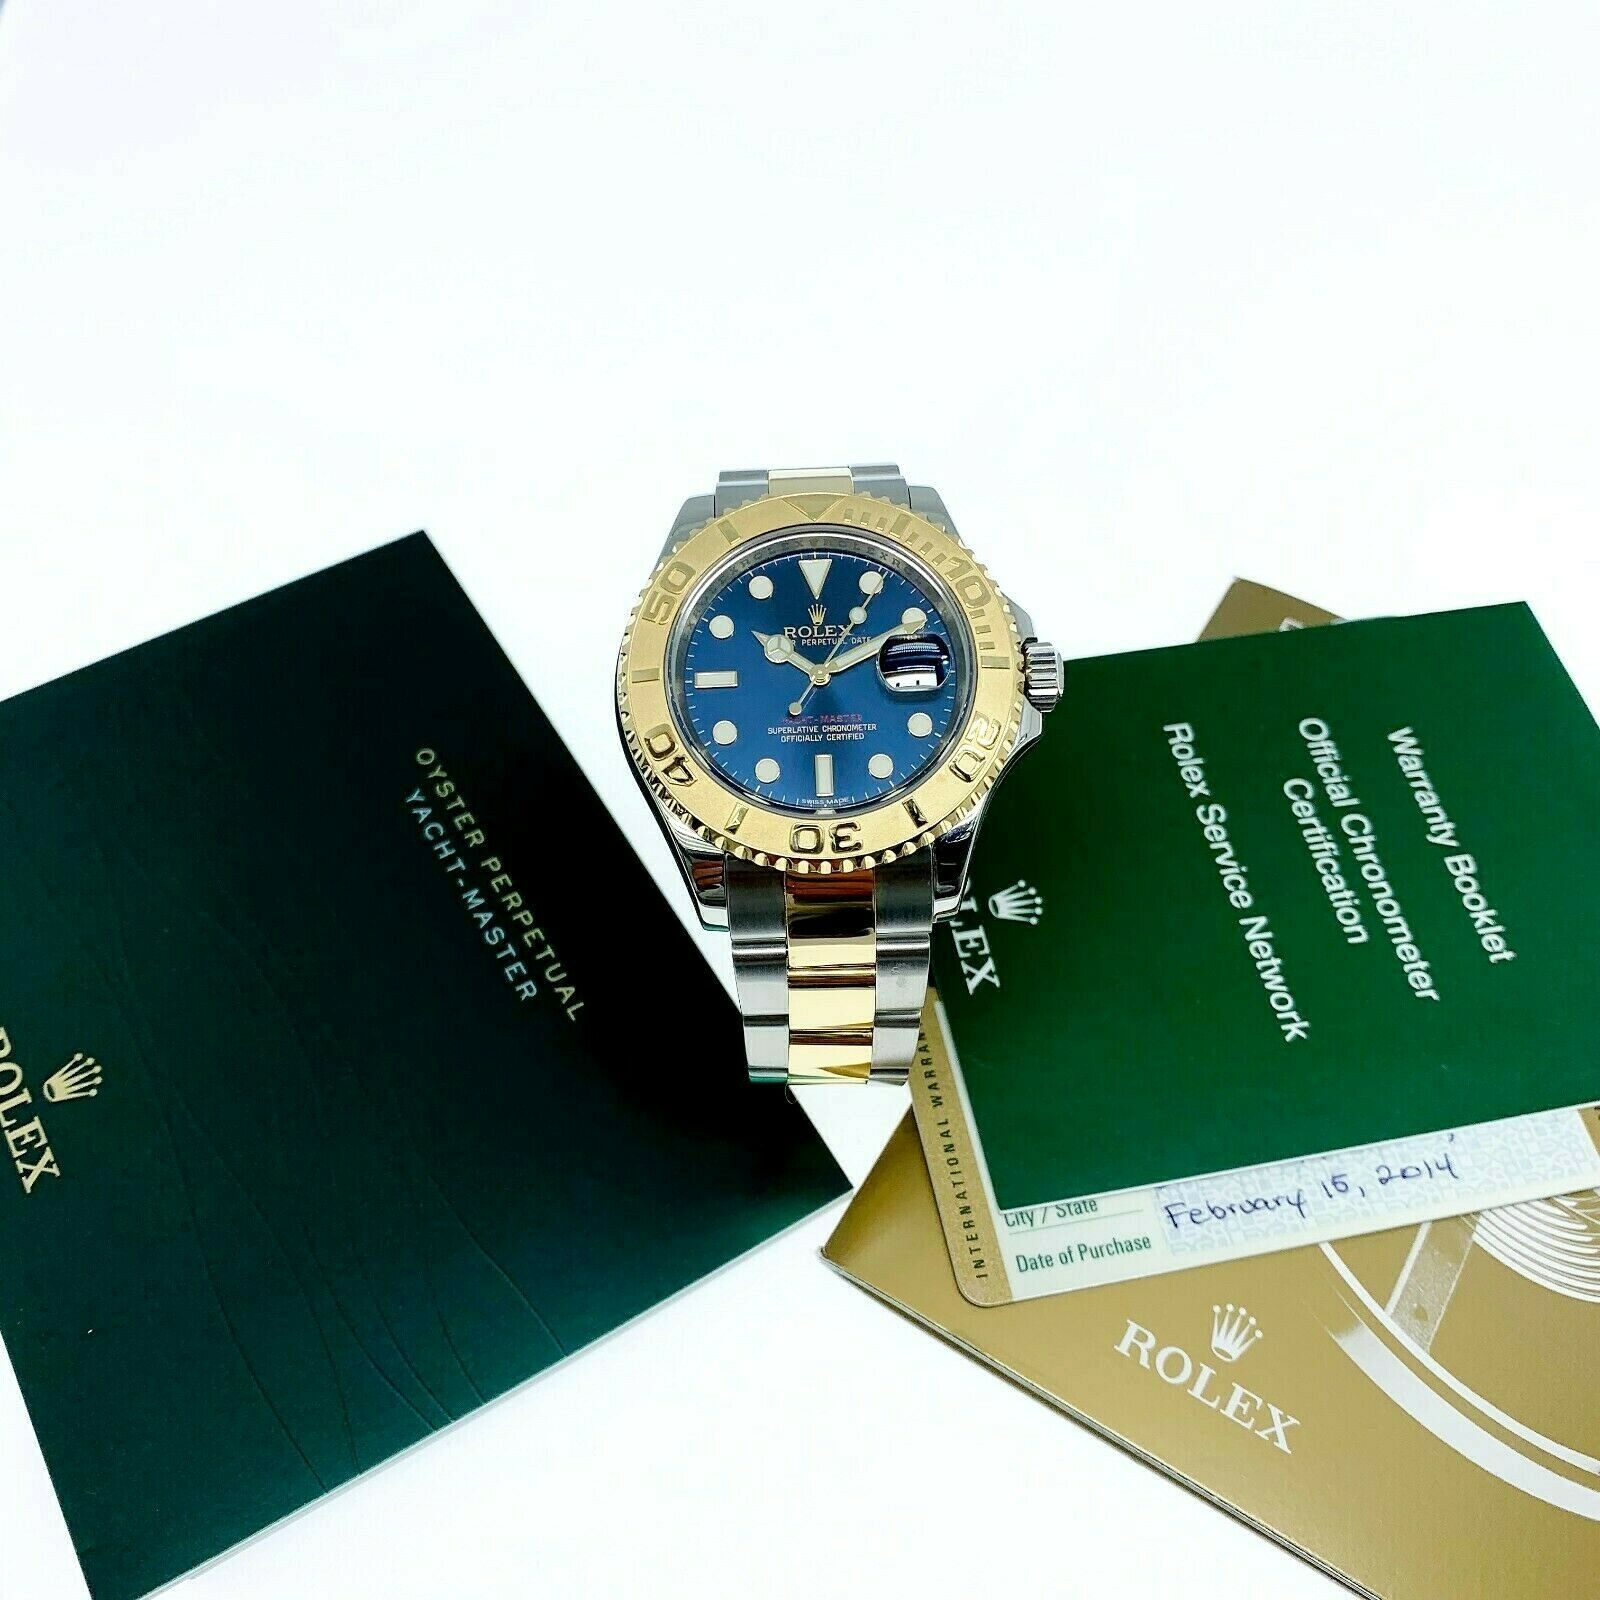 Rolex 40 MM Mens Yacht-Master 18K Gold and Steel Watch Ref # 16623 Box and Card